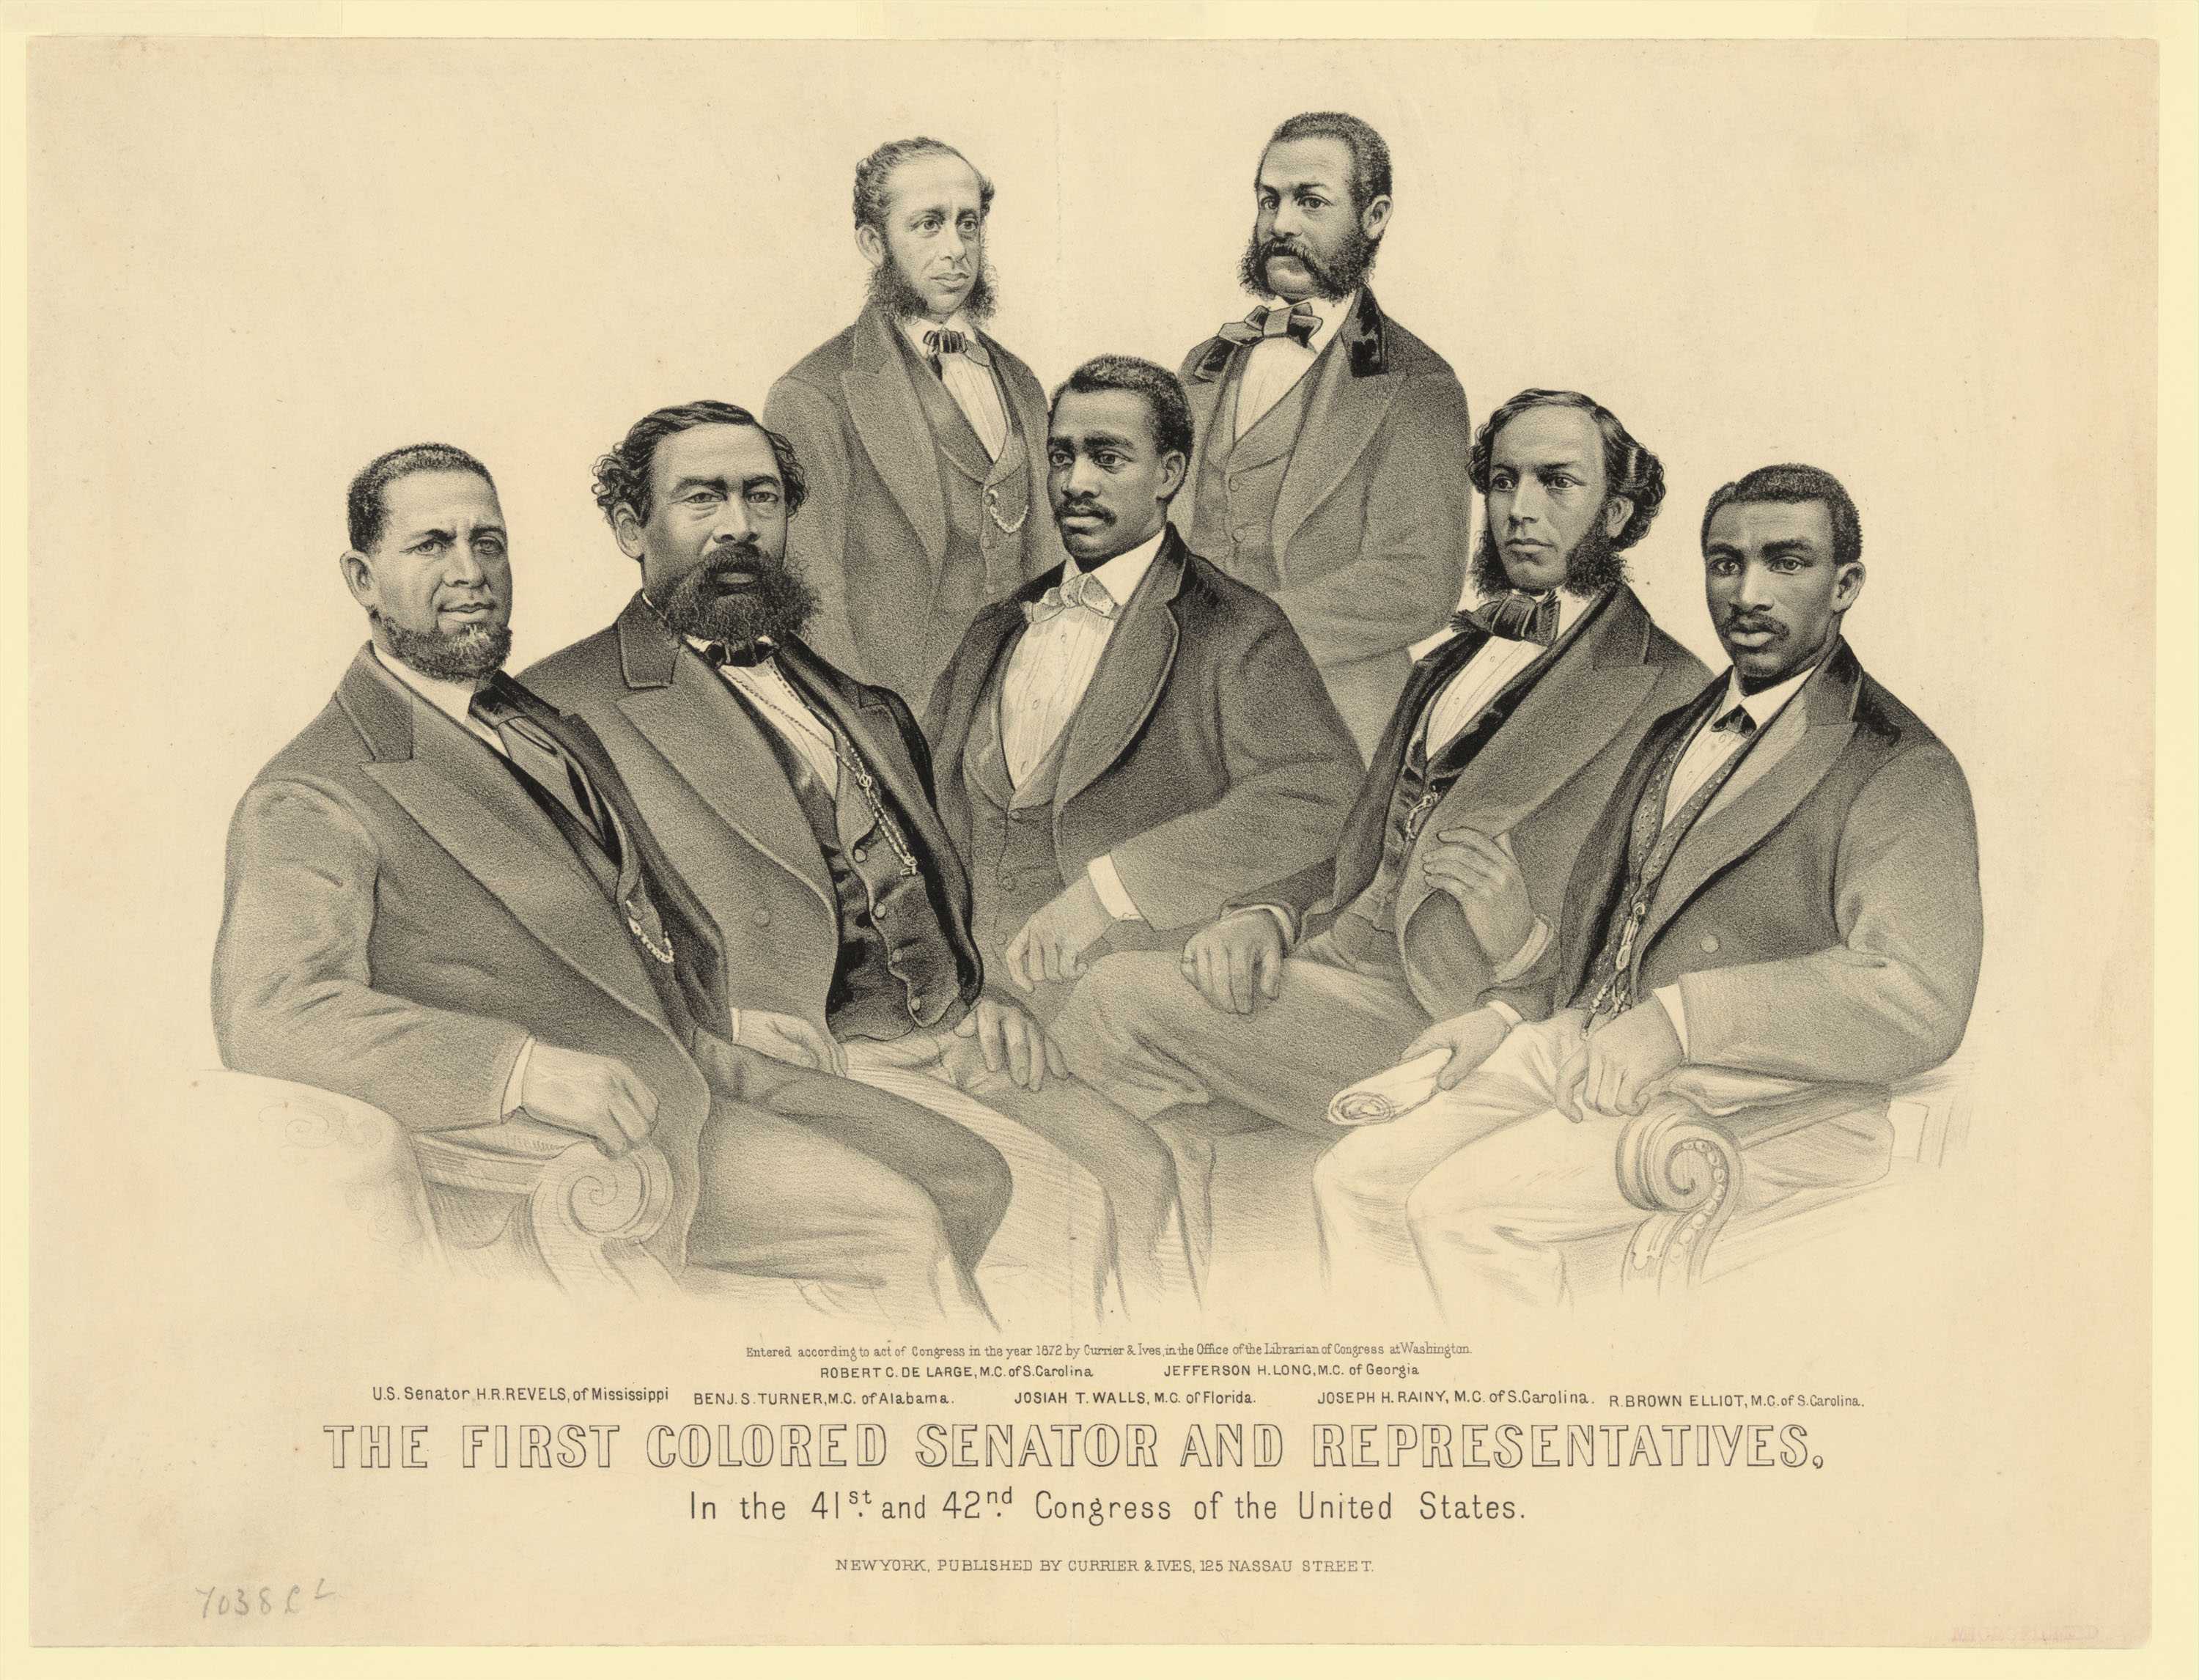 A lithograph print of the first black congressmen dressed in suits in the 41st and 42nd Congress.